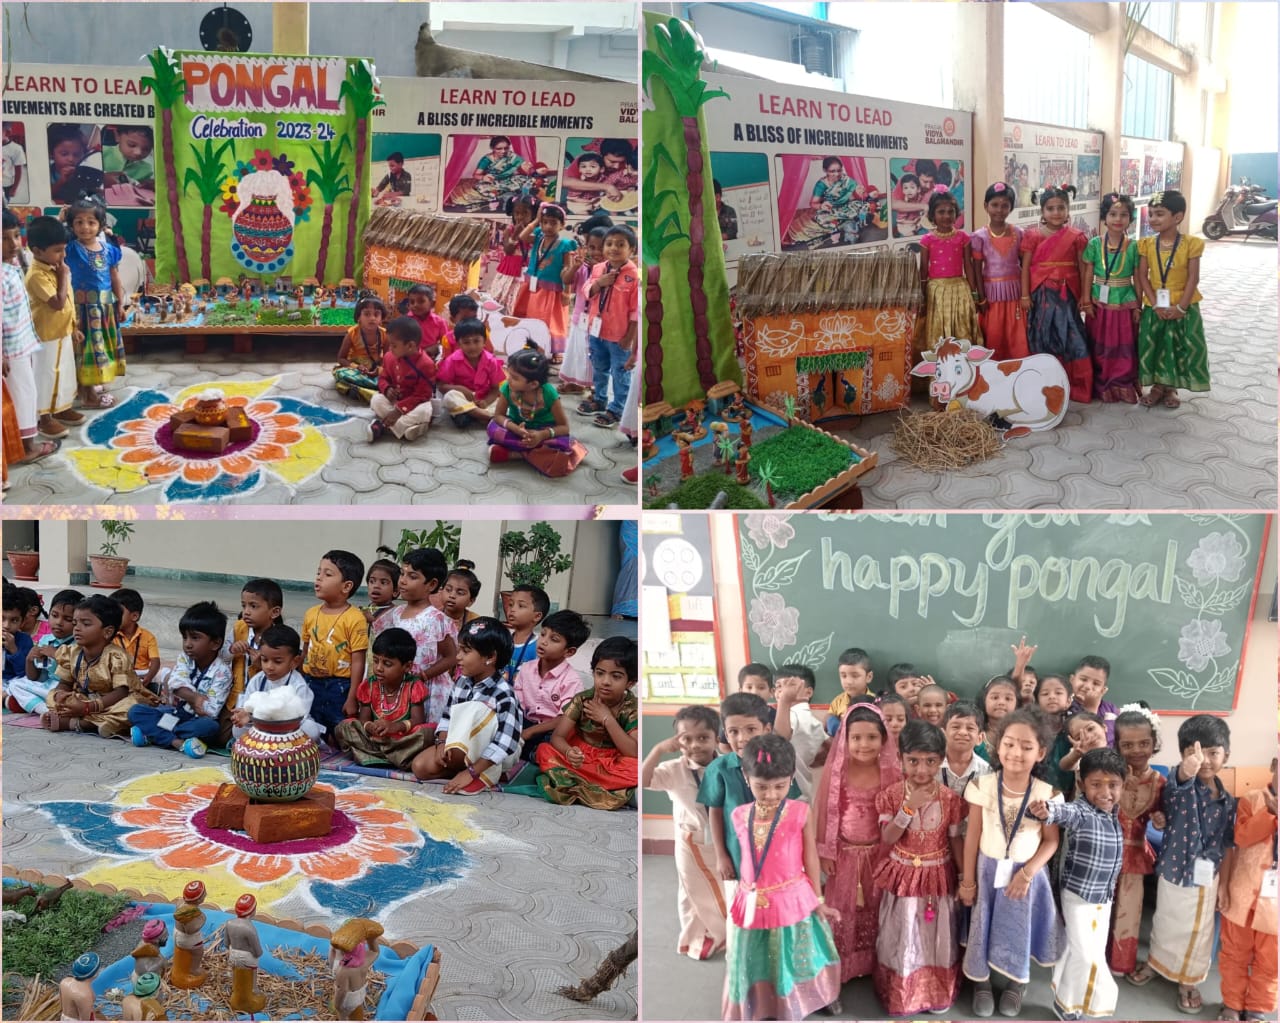 Pongalo… Pongal… Celebrated the day with a heart filled with cheer and fervour…